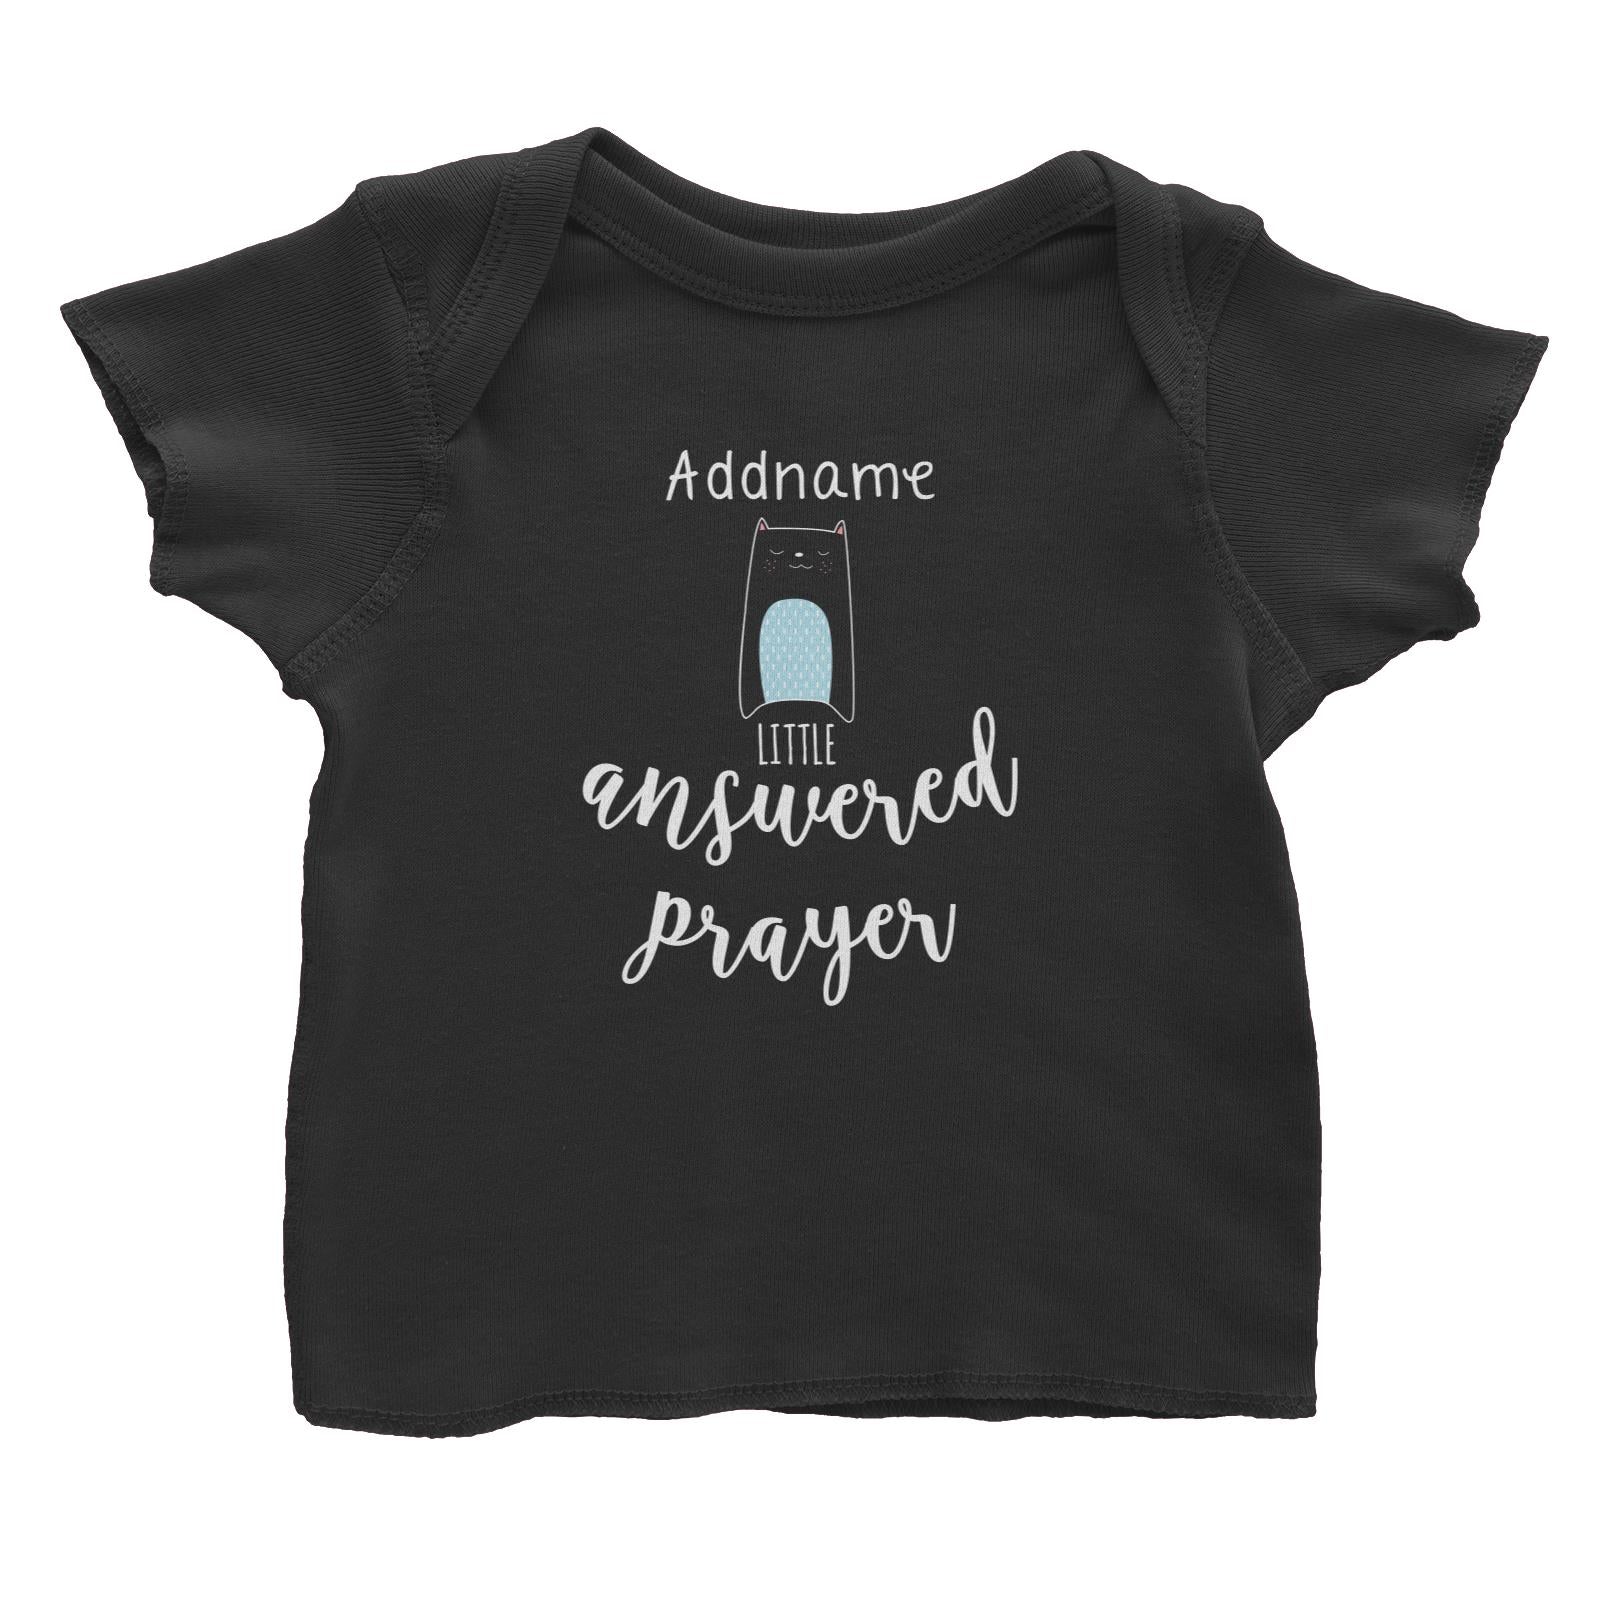 Cute Animals and Friends Series 2 Cat Addname Little Answered Prayer Baby T-Shirt